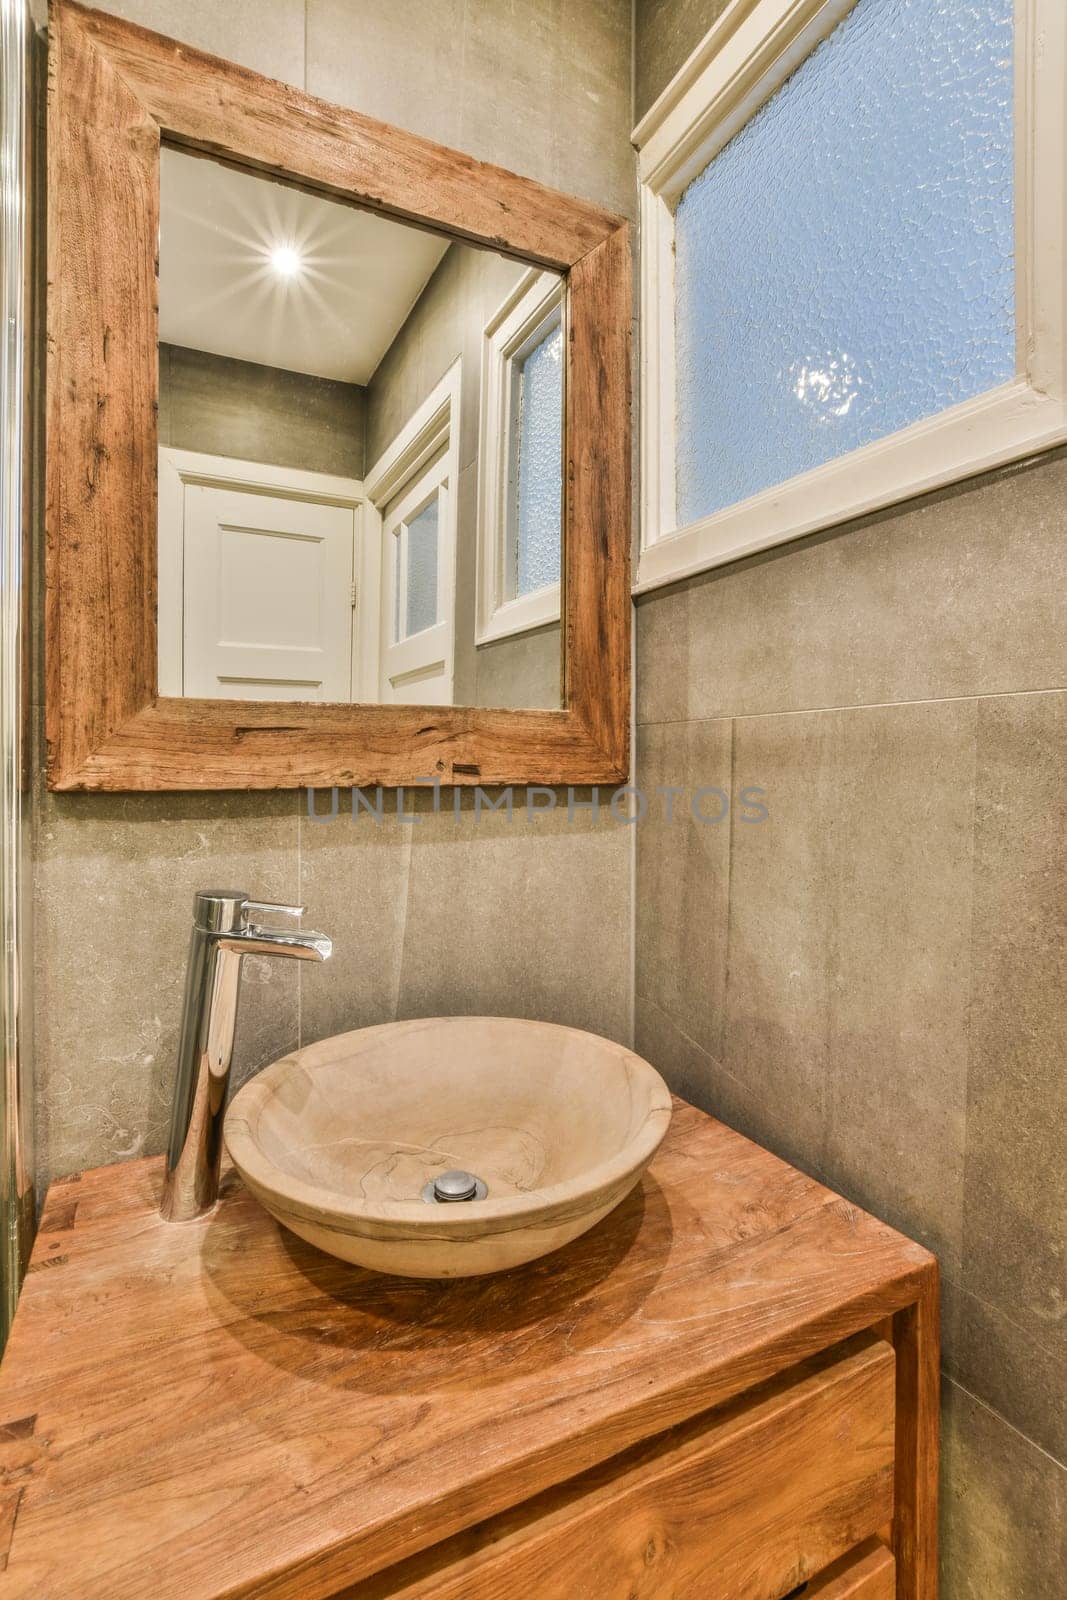 a bathroom with a wooden sink and mirror in the corner on the wall above it is a window that looks out to the outside